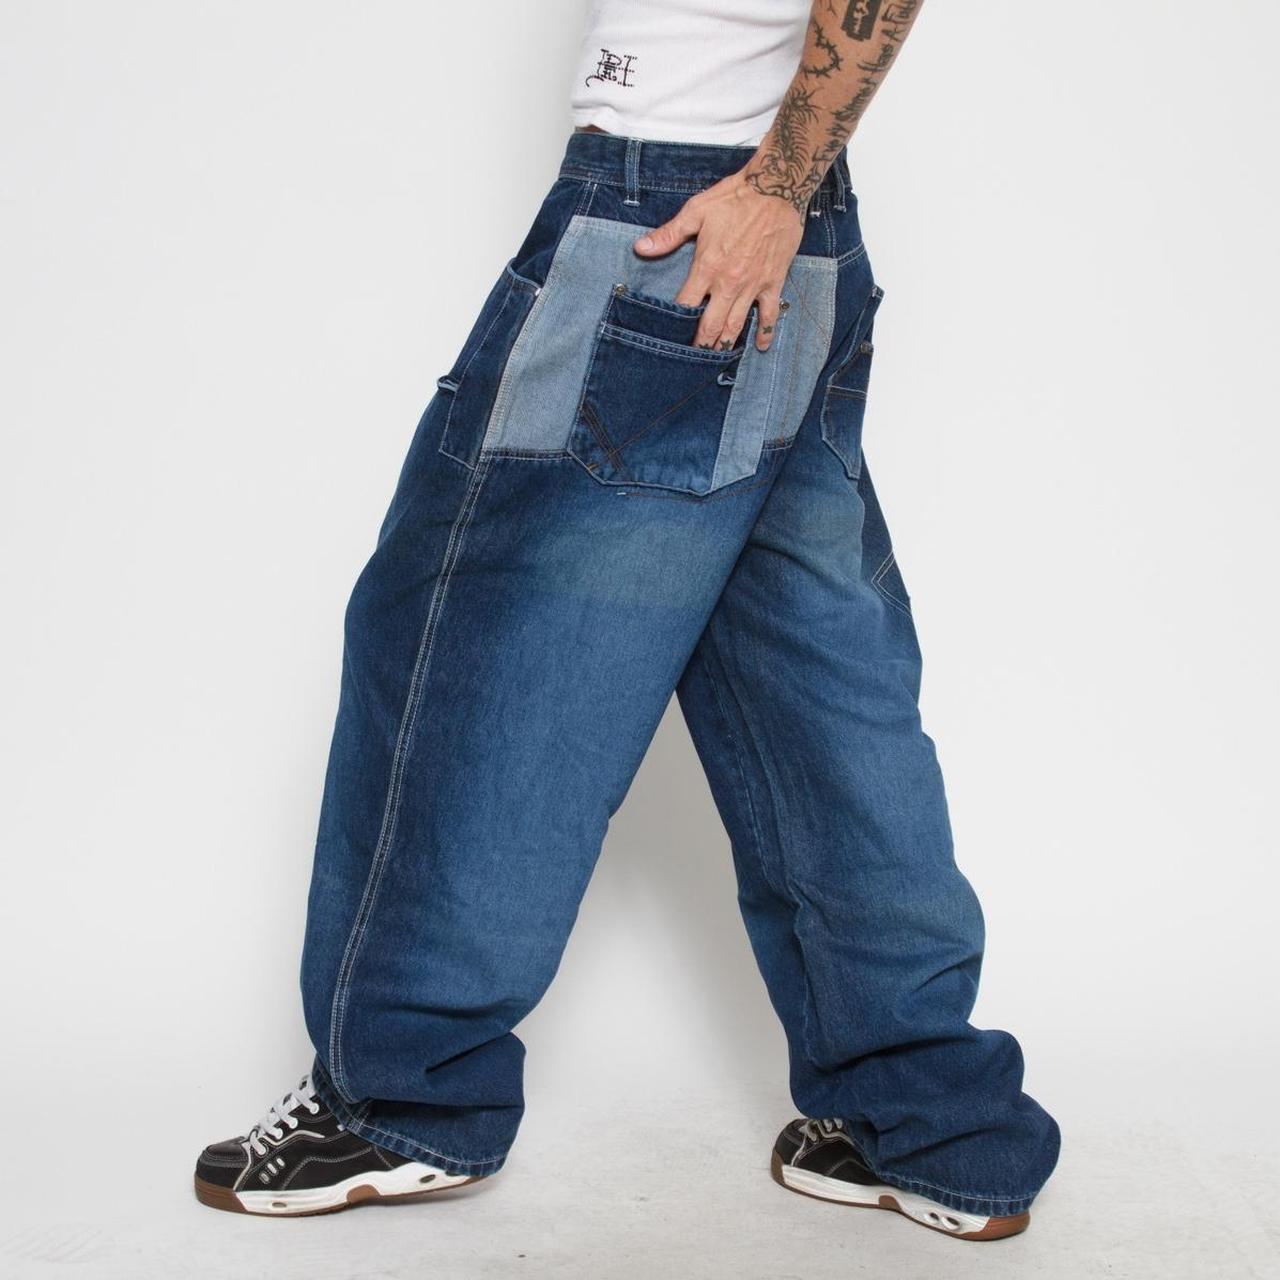 Cultura Men's Navy and Blue Jeans (4)